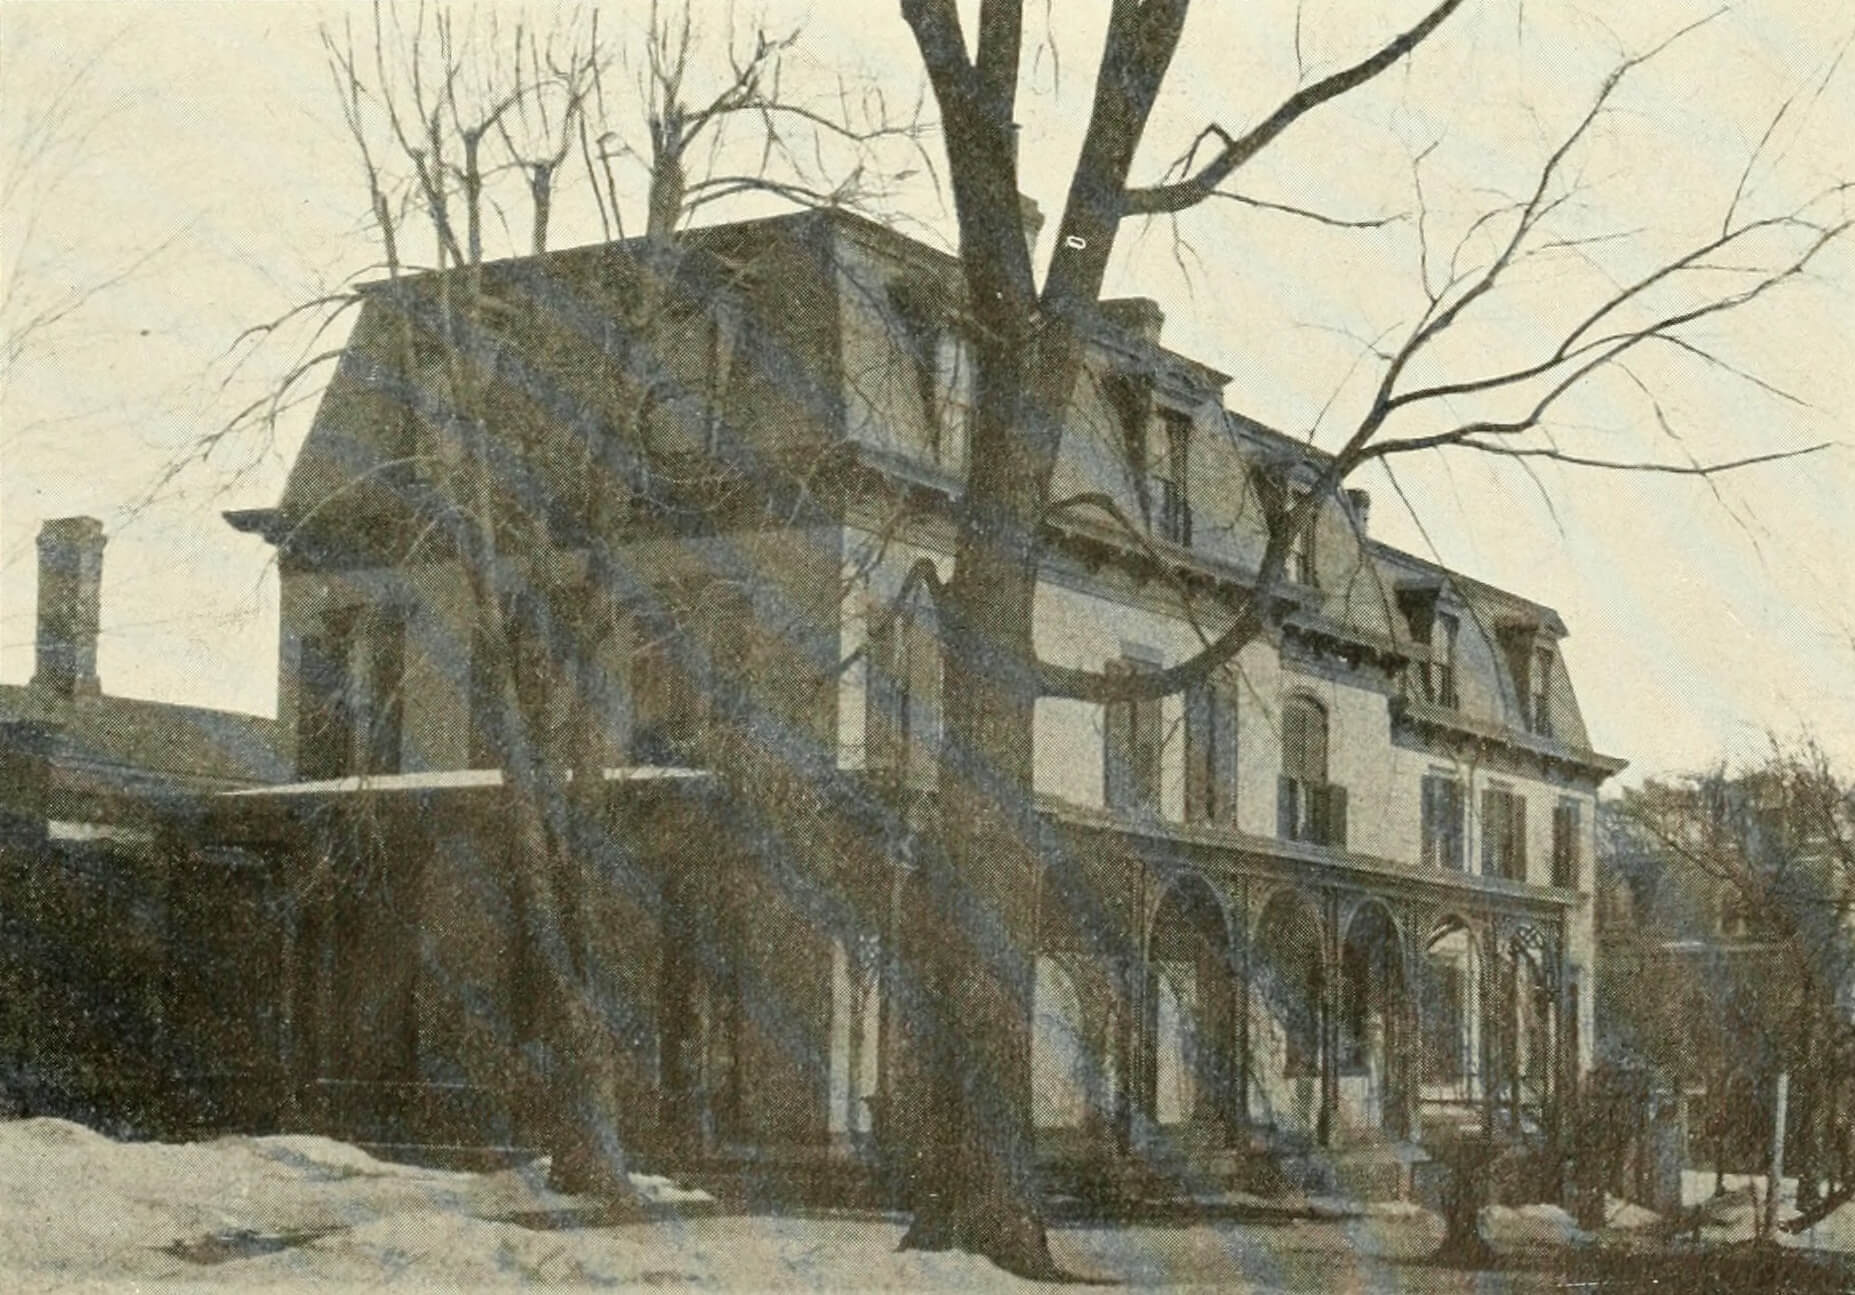 historic image of exterior of house